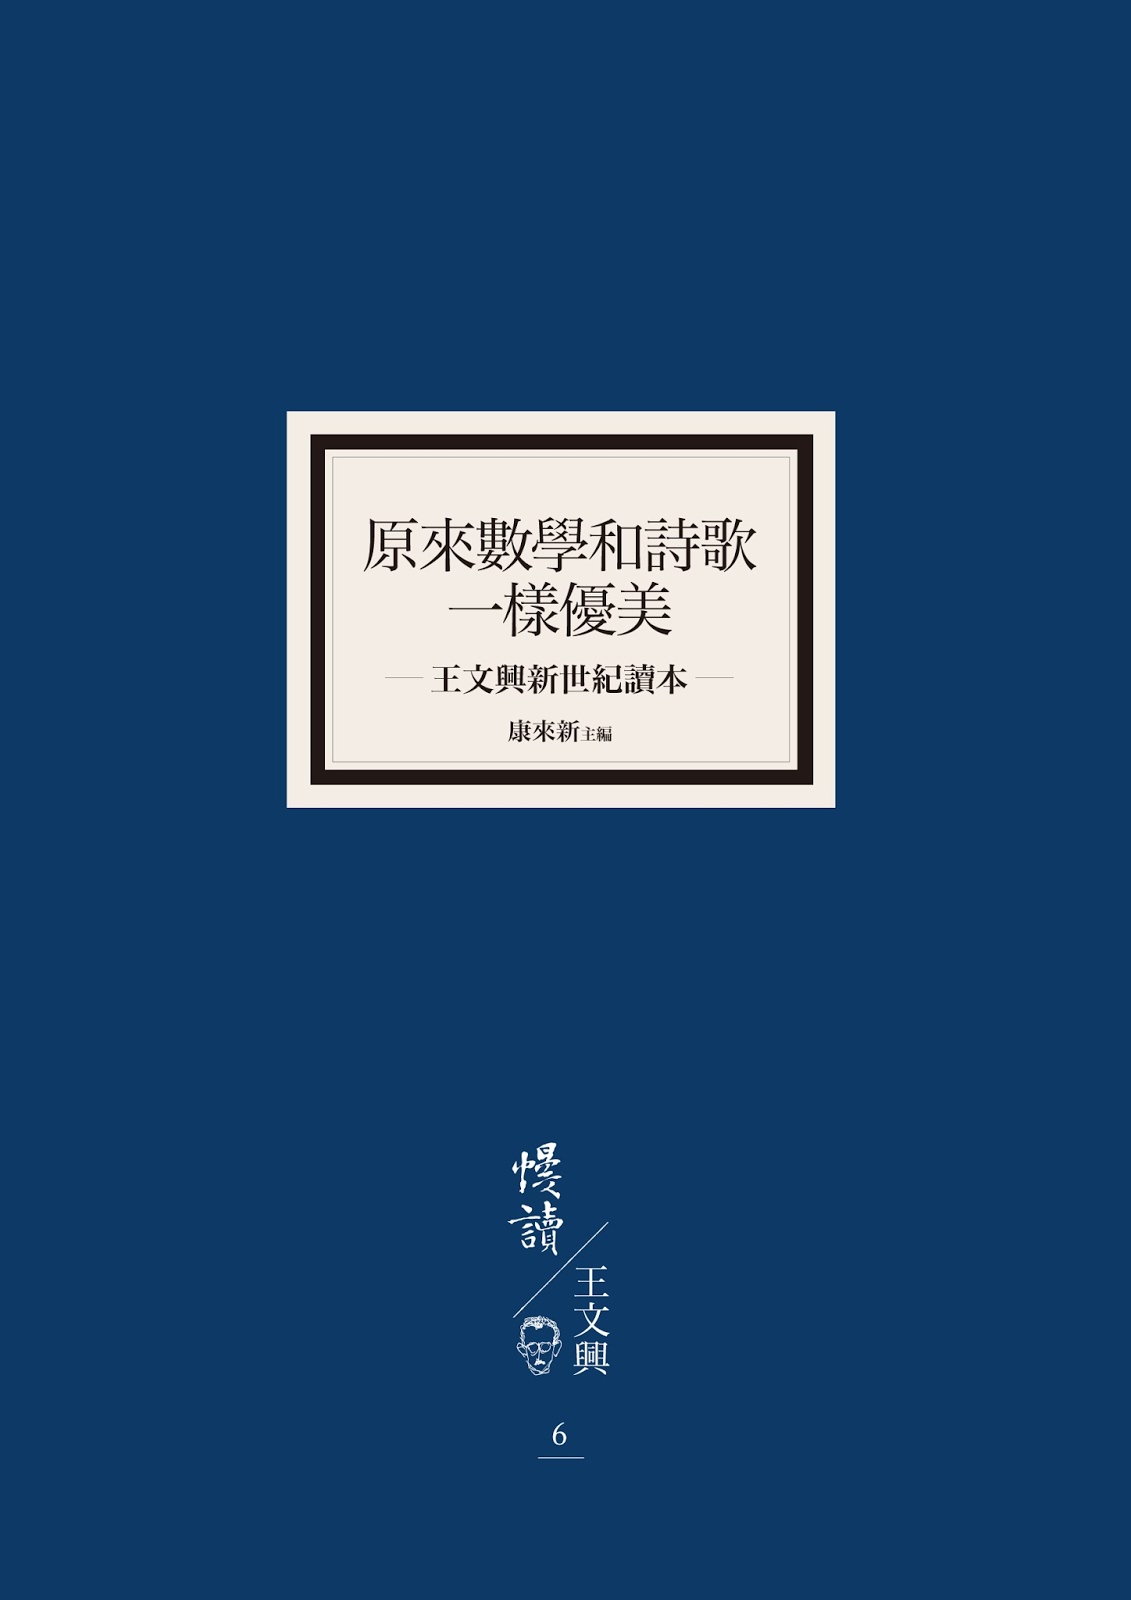 <i>Mathematics and Poetry’s Equal Elegance: A Reader of Wang Wen-hsing in the New Century</i>《原來數學和詩歌一樣優美――王文興新世紀讀本》